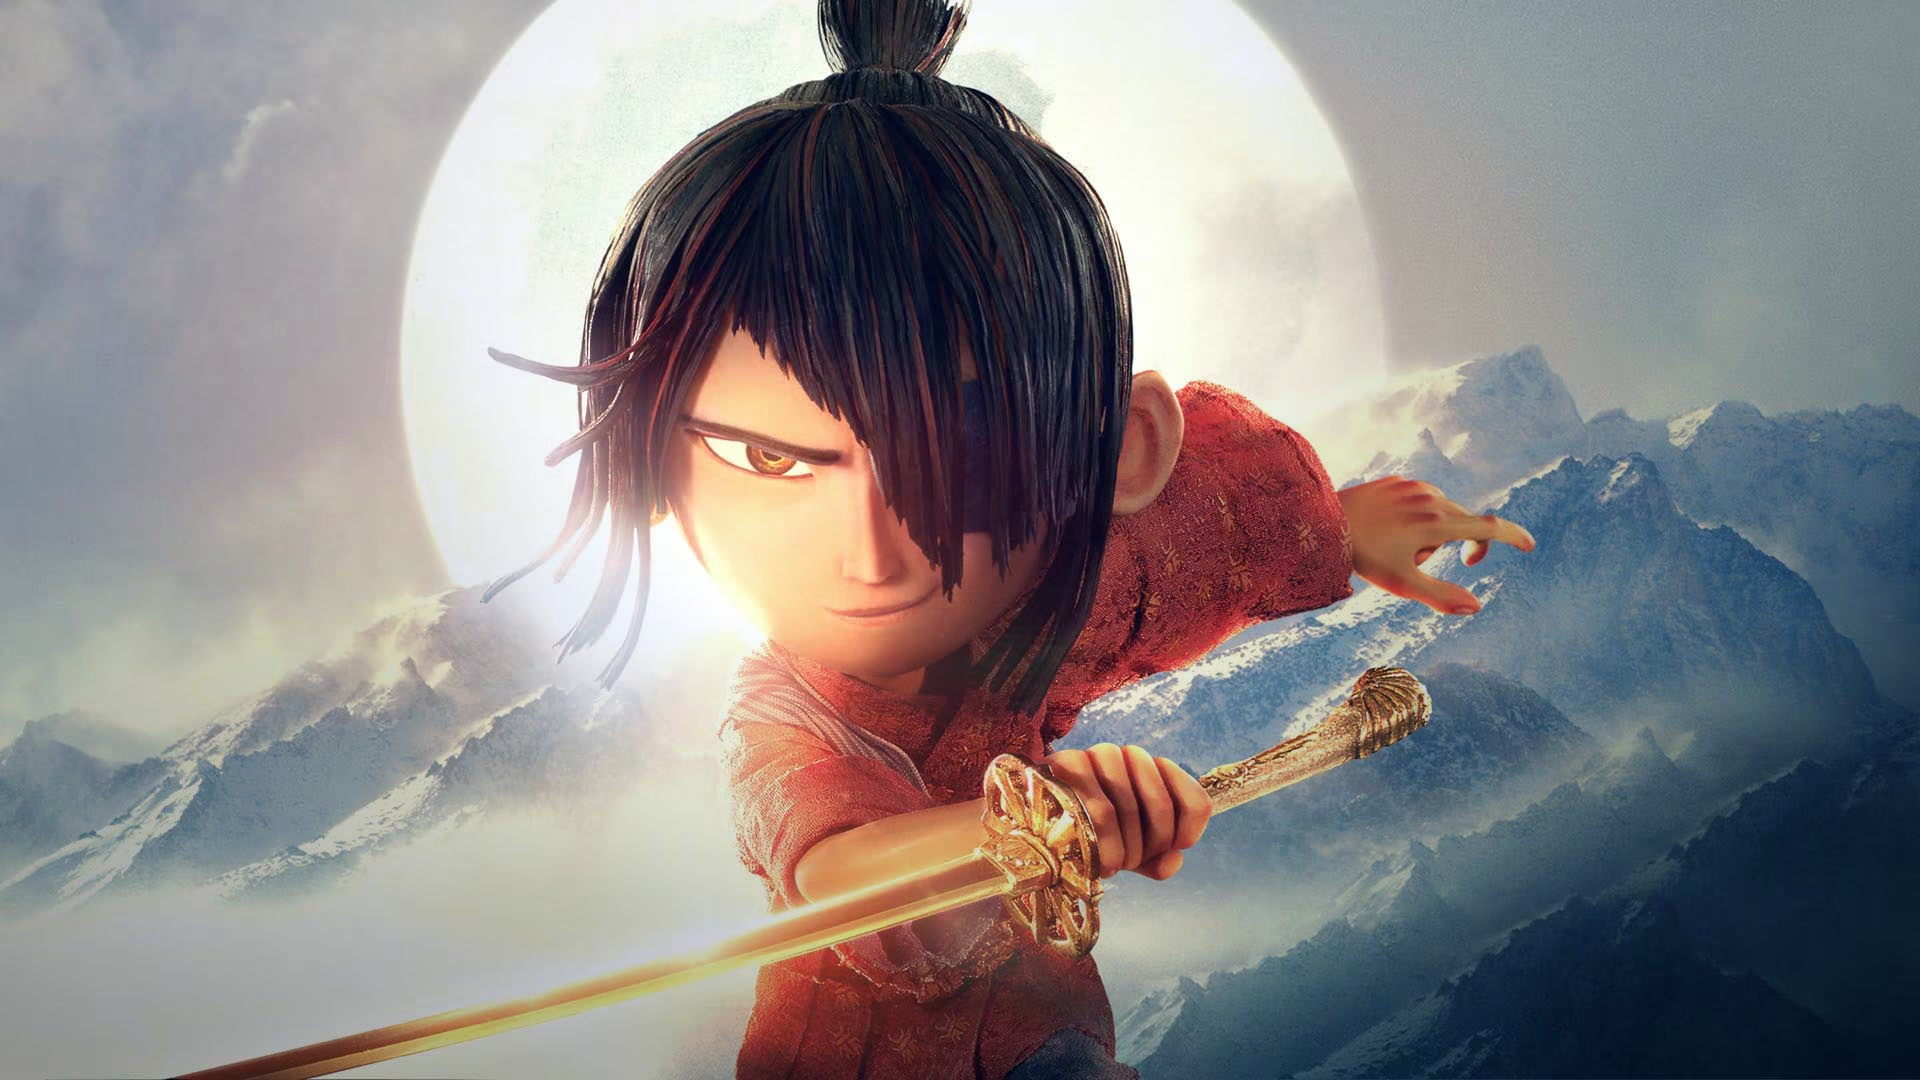 Kubo and the Two Strings (2016) film still